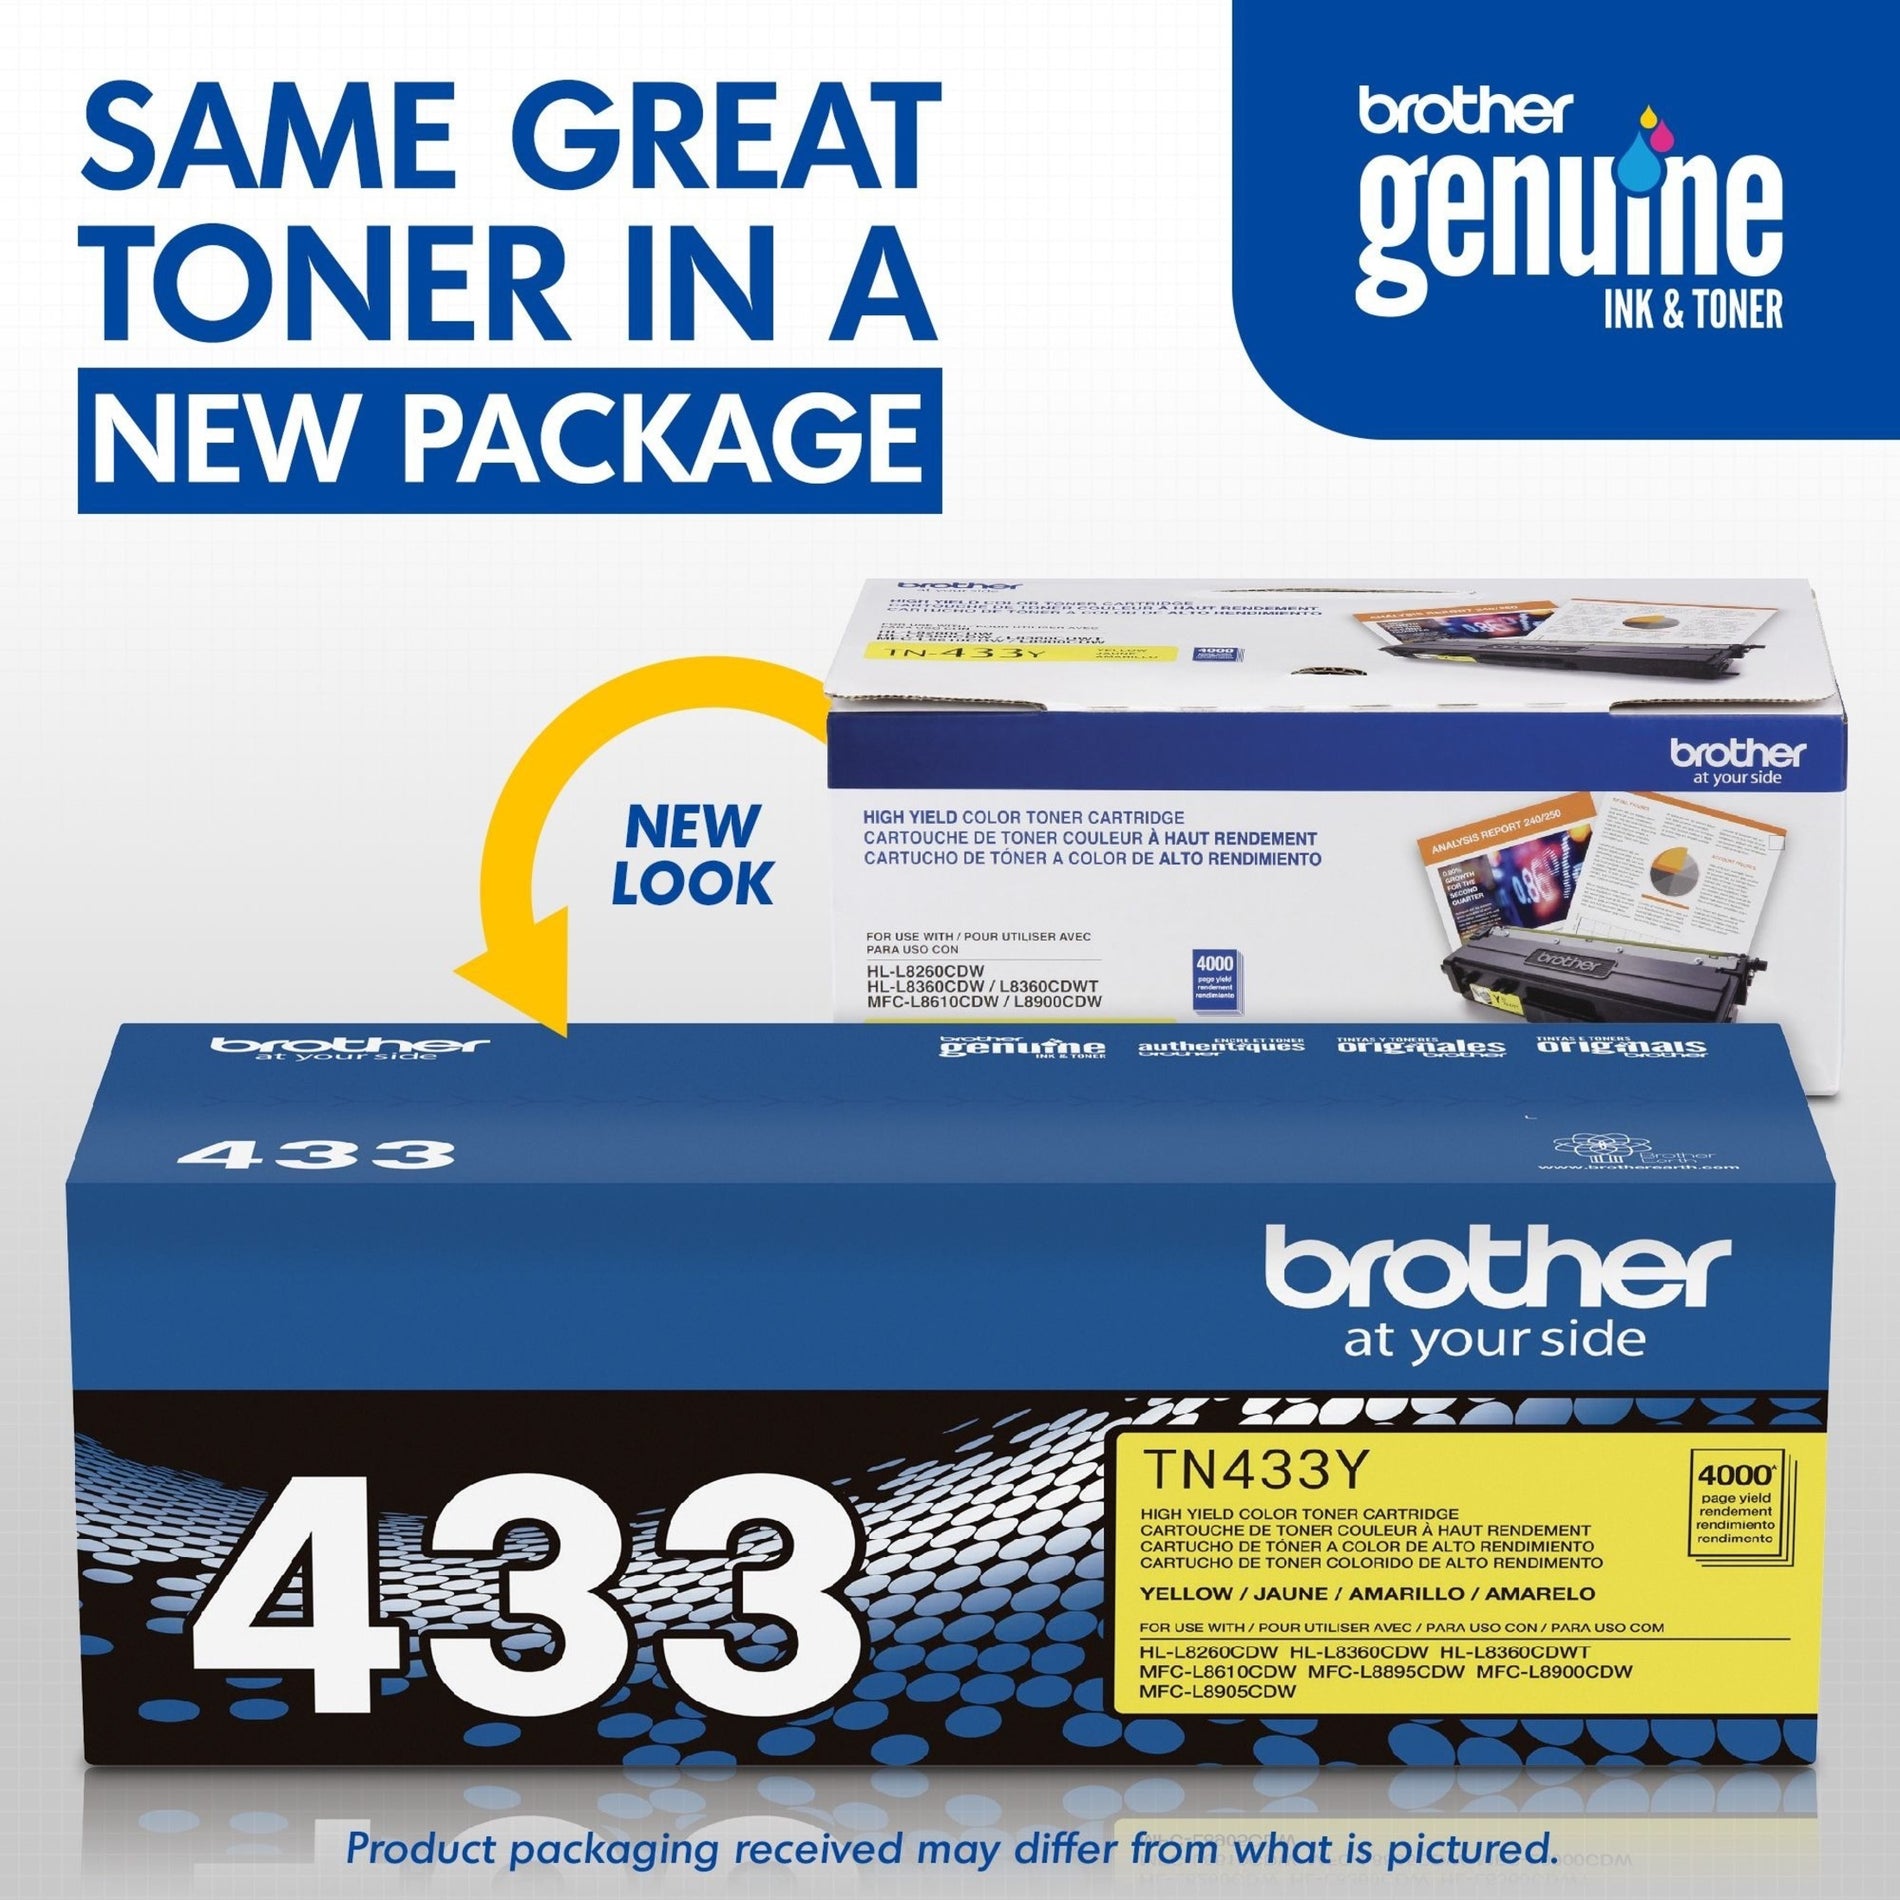 Brother TN433Y Toner Cartridge, 4000 Page High Yield, Yellow